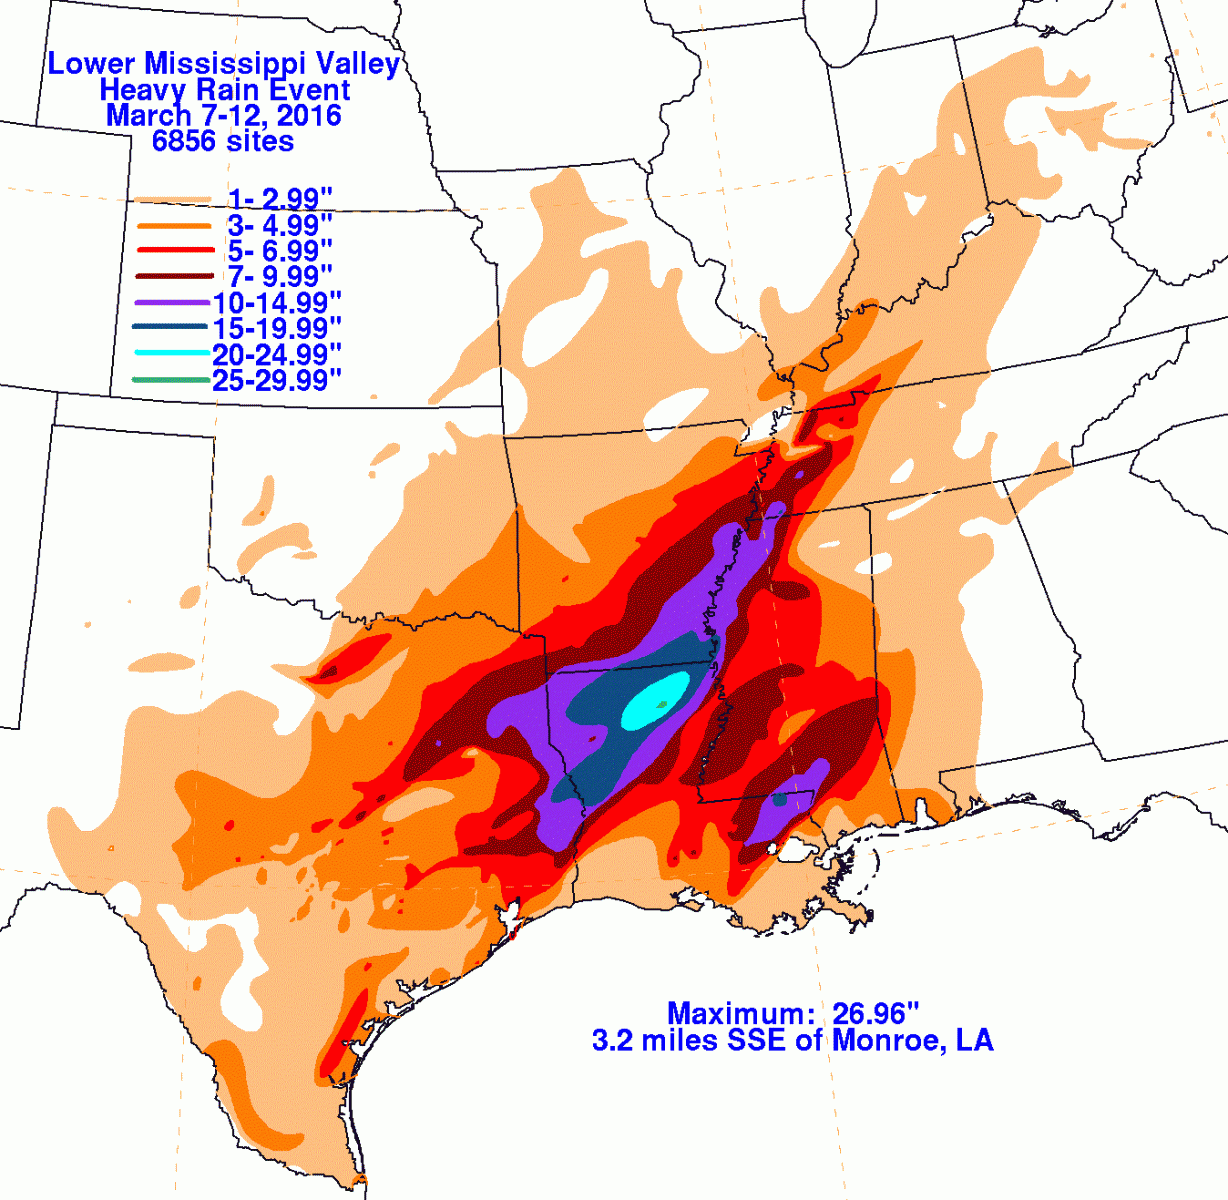 Image of rainfall totals